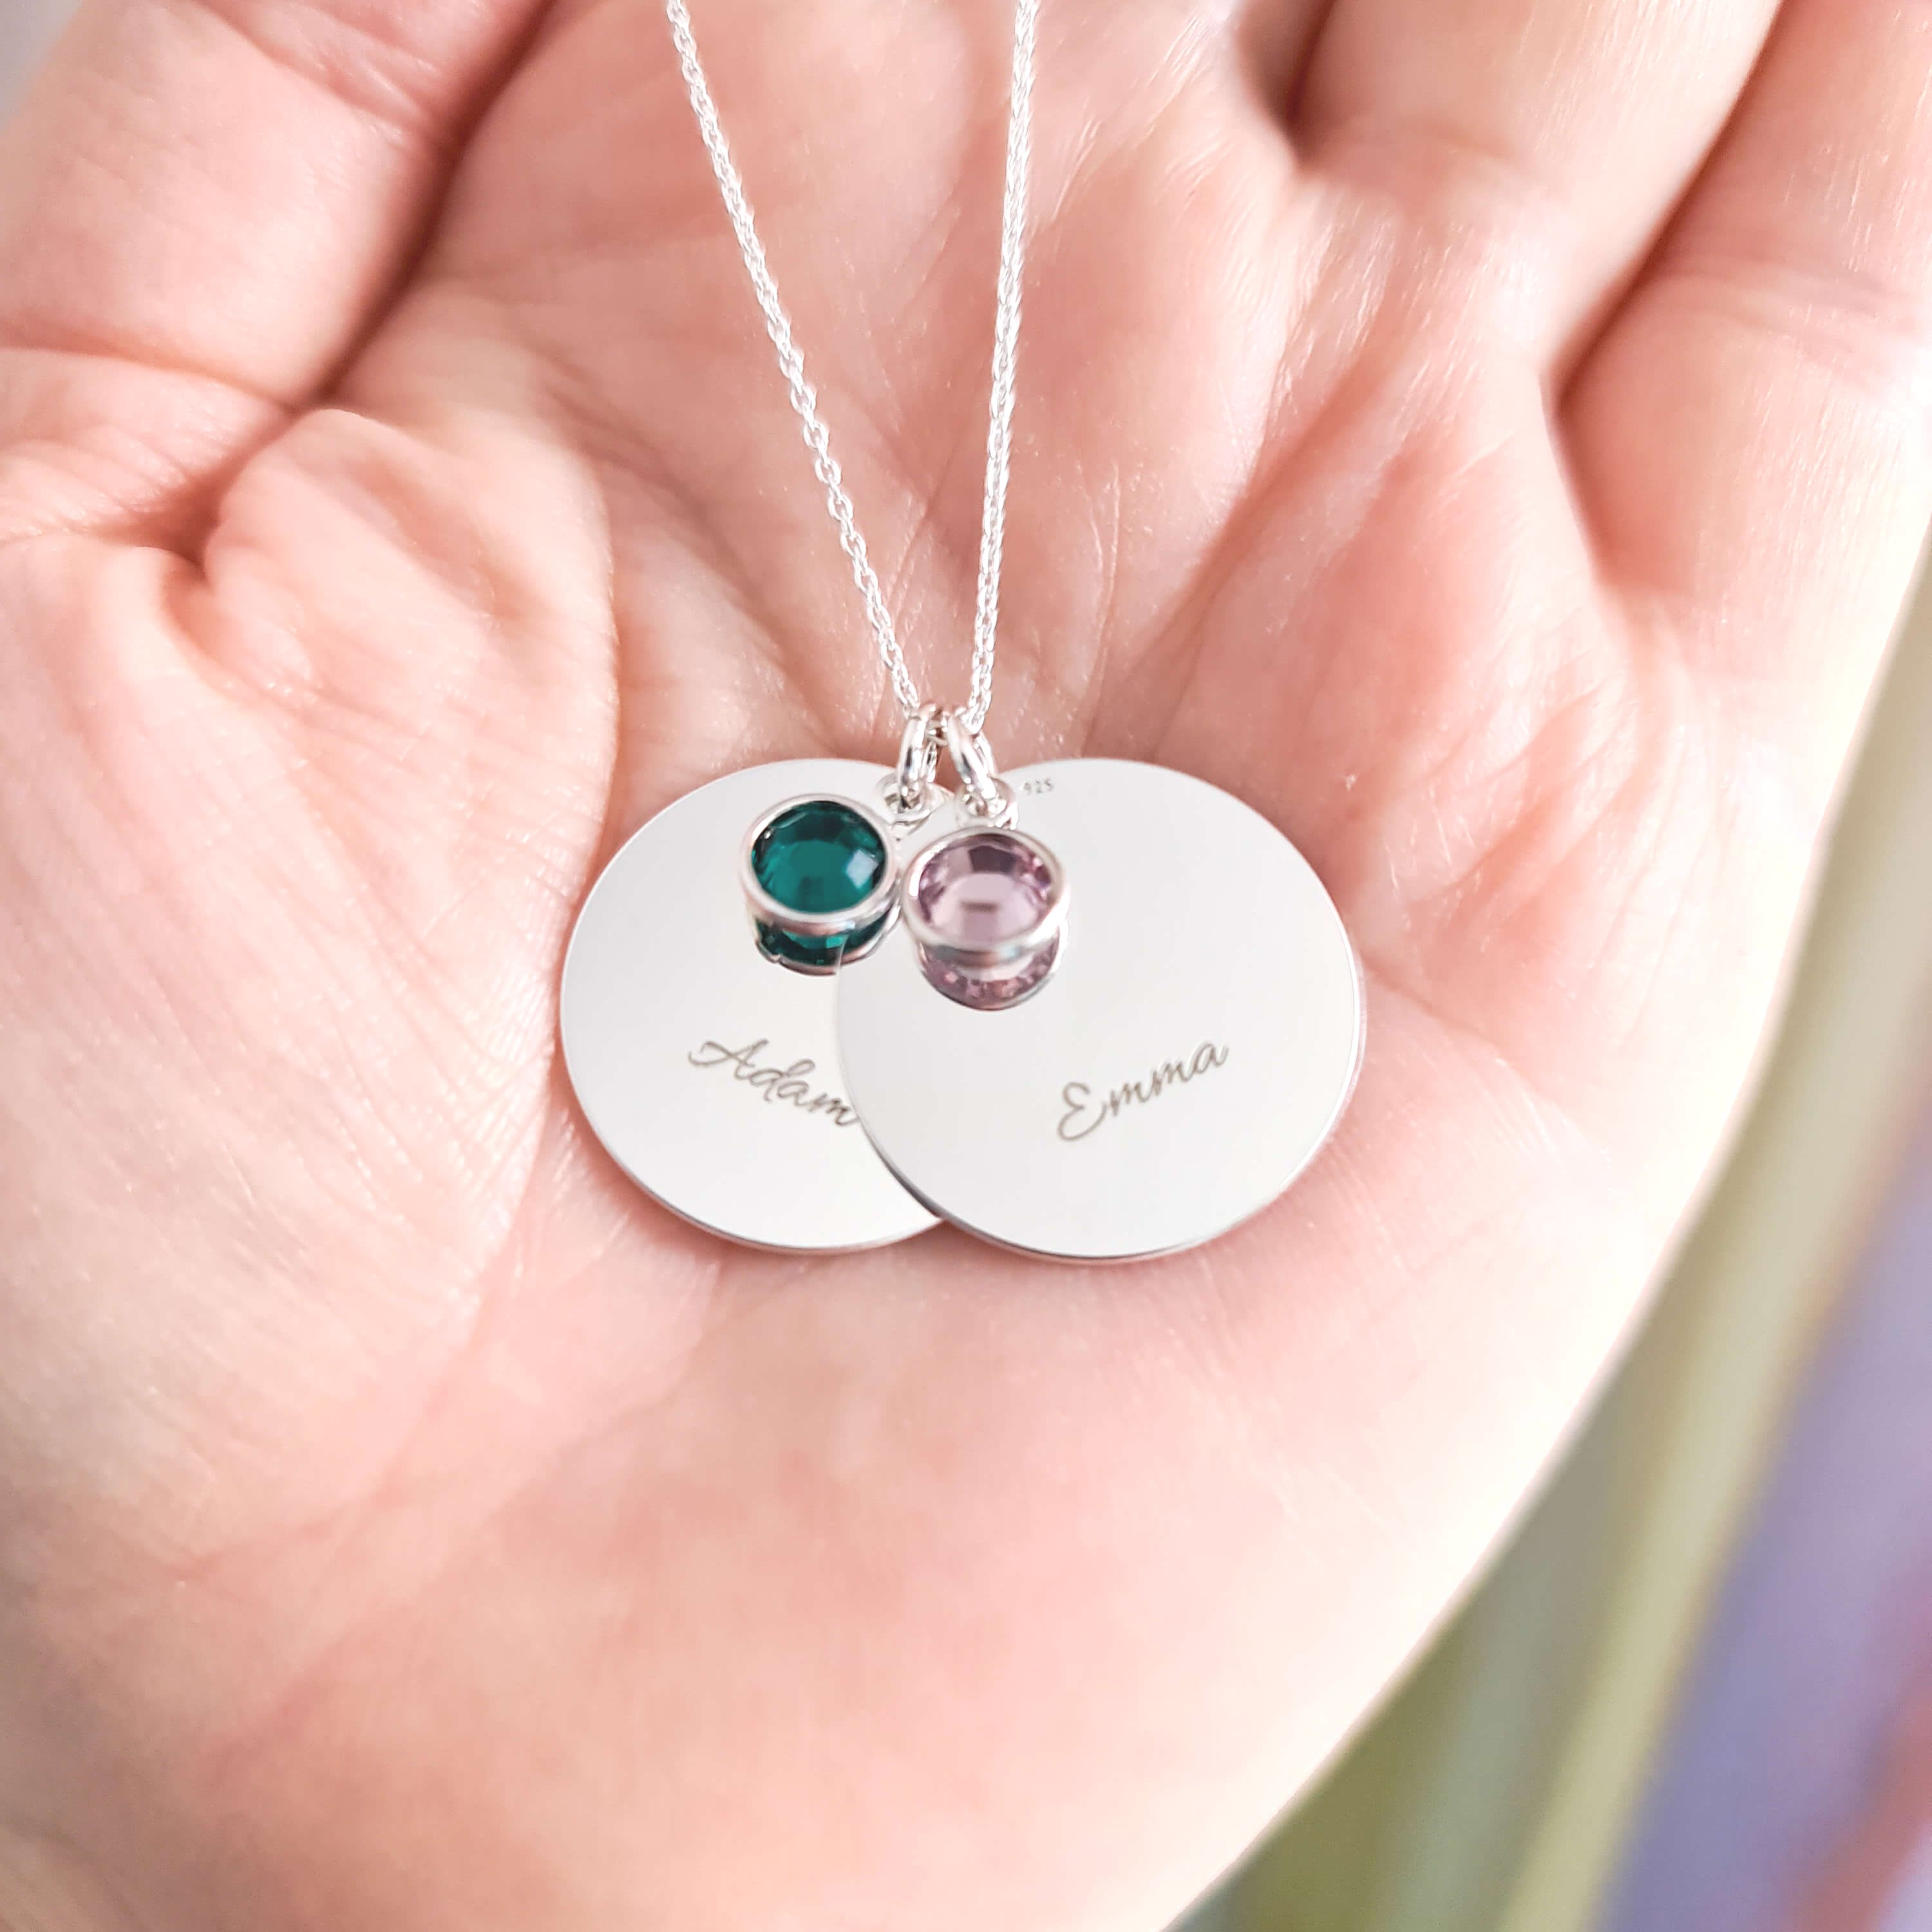 Silver necklace with children names and birthstones from Ireland